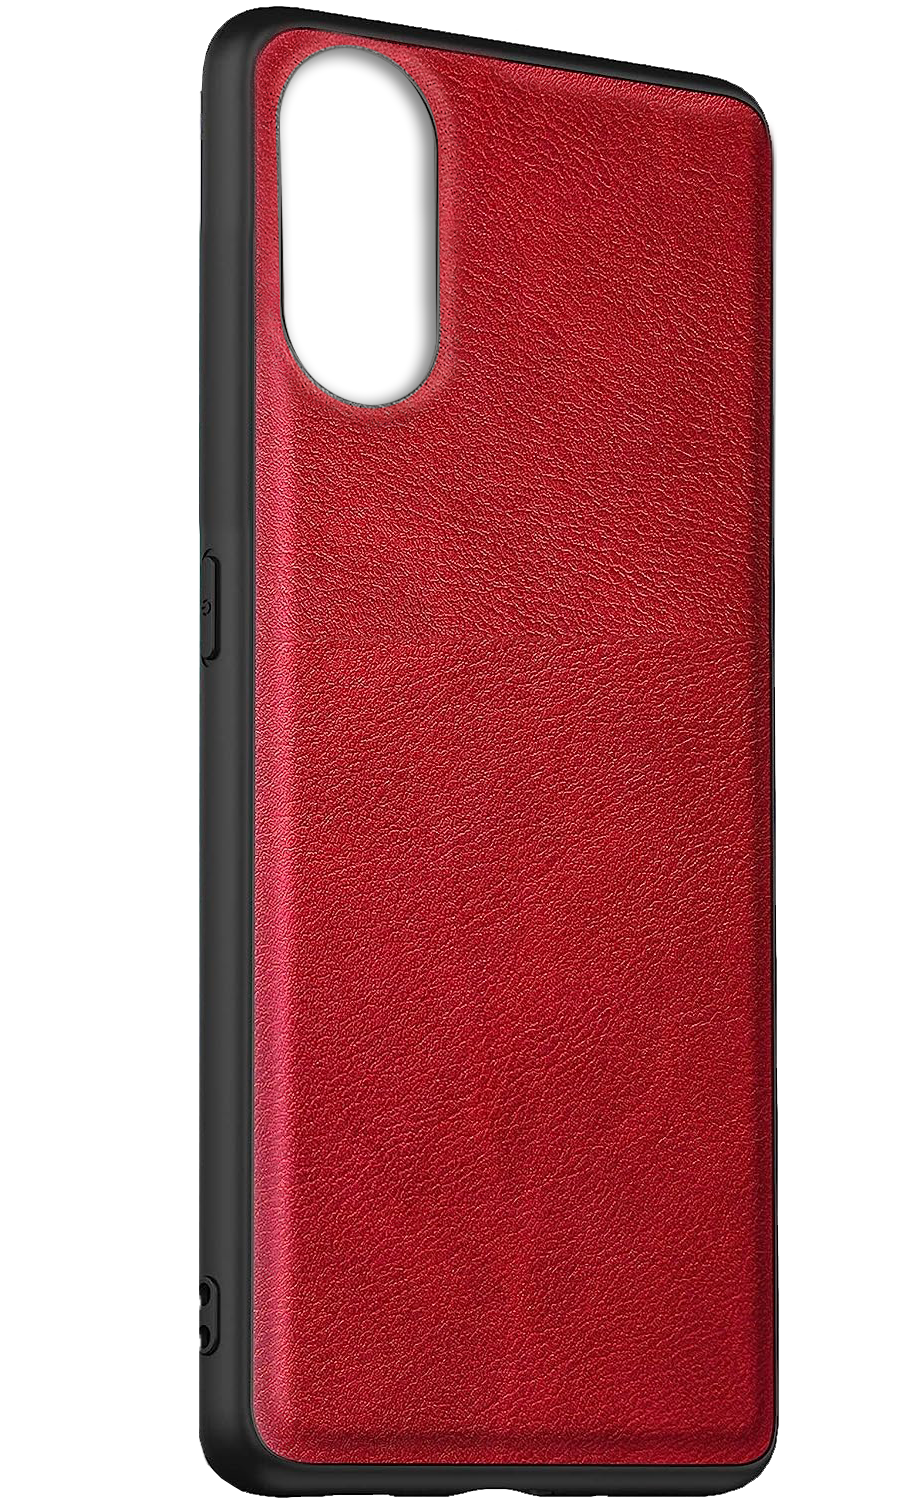 Excelsior Premium Vintage PU Leather Back Cover case For Oppo Reno 8T